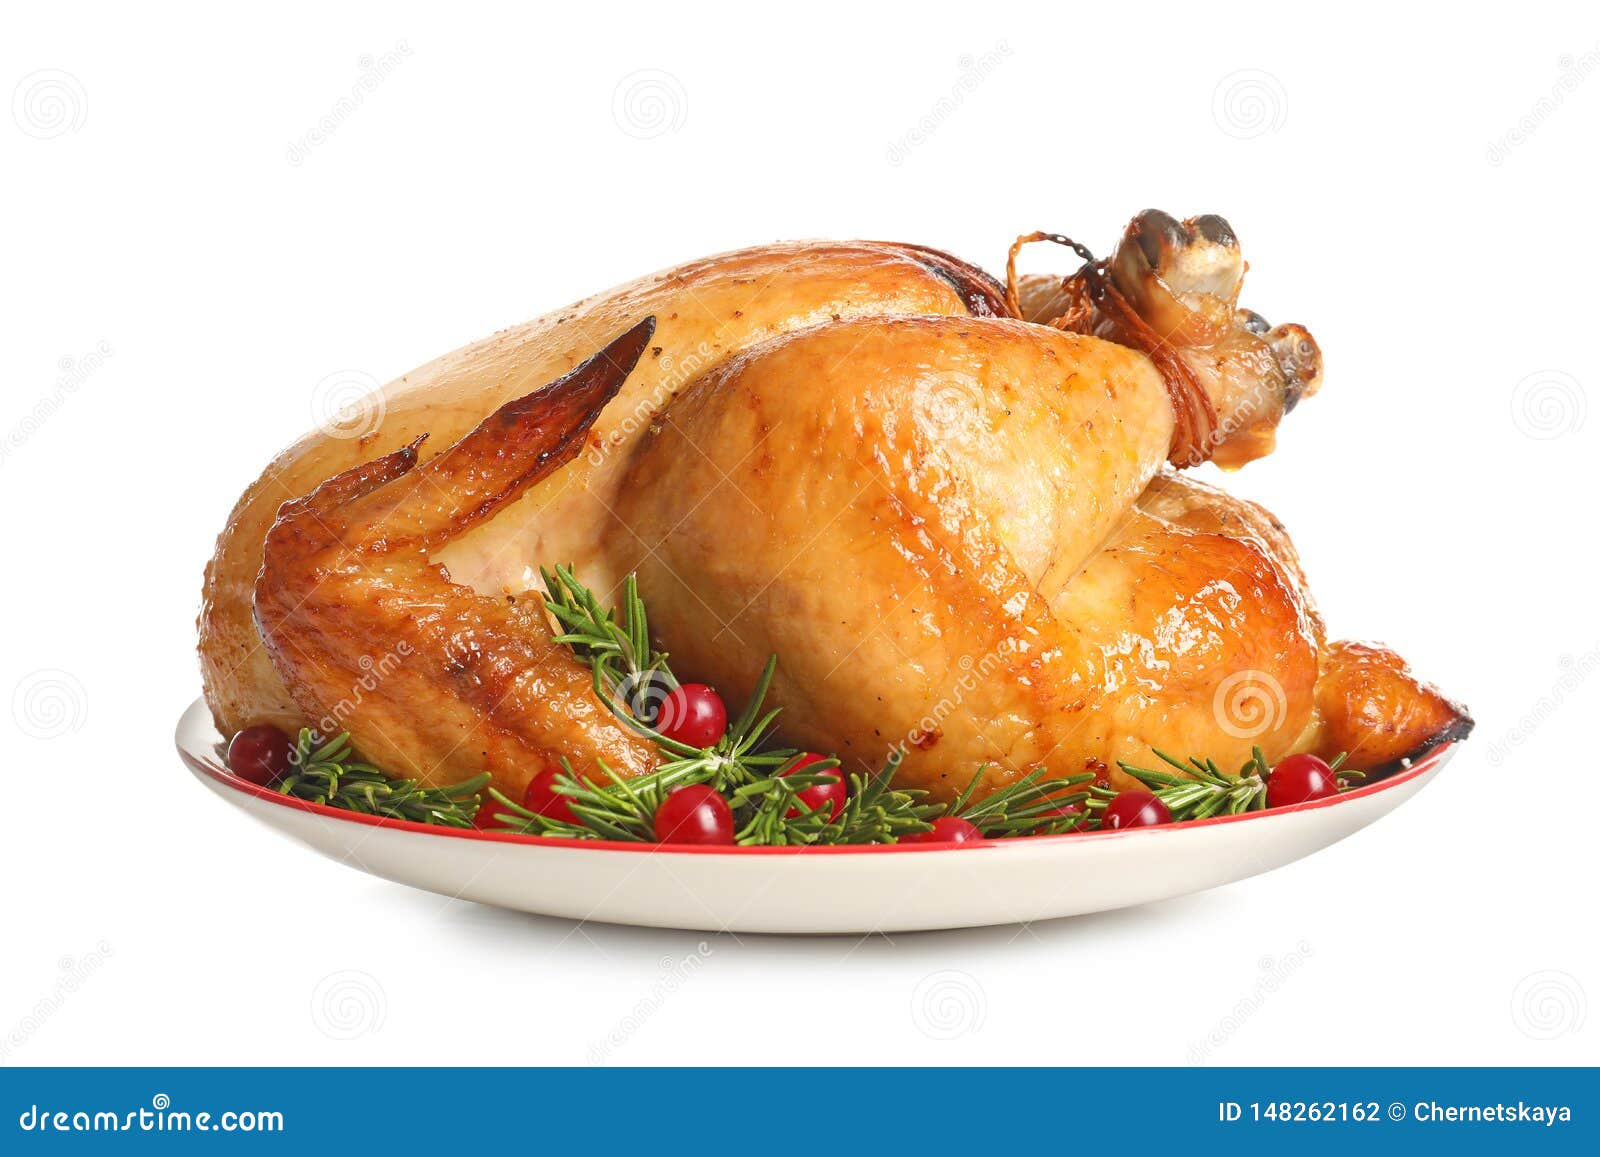 platter of cooked turkey with garnish on white